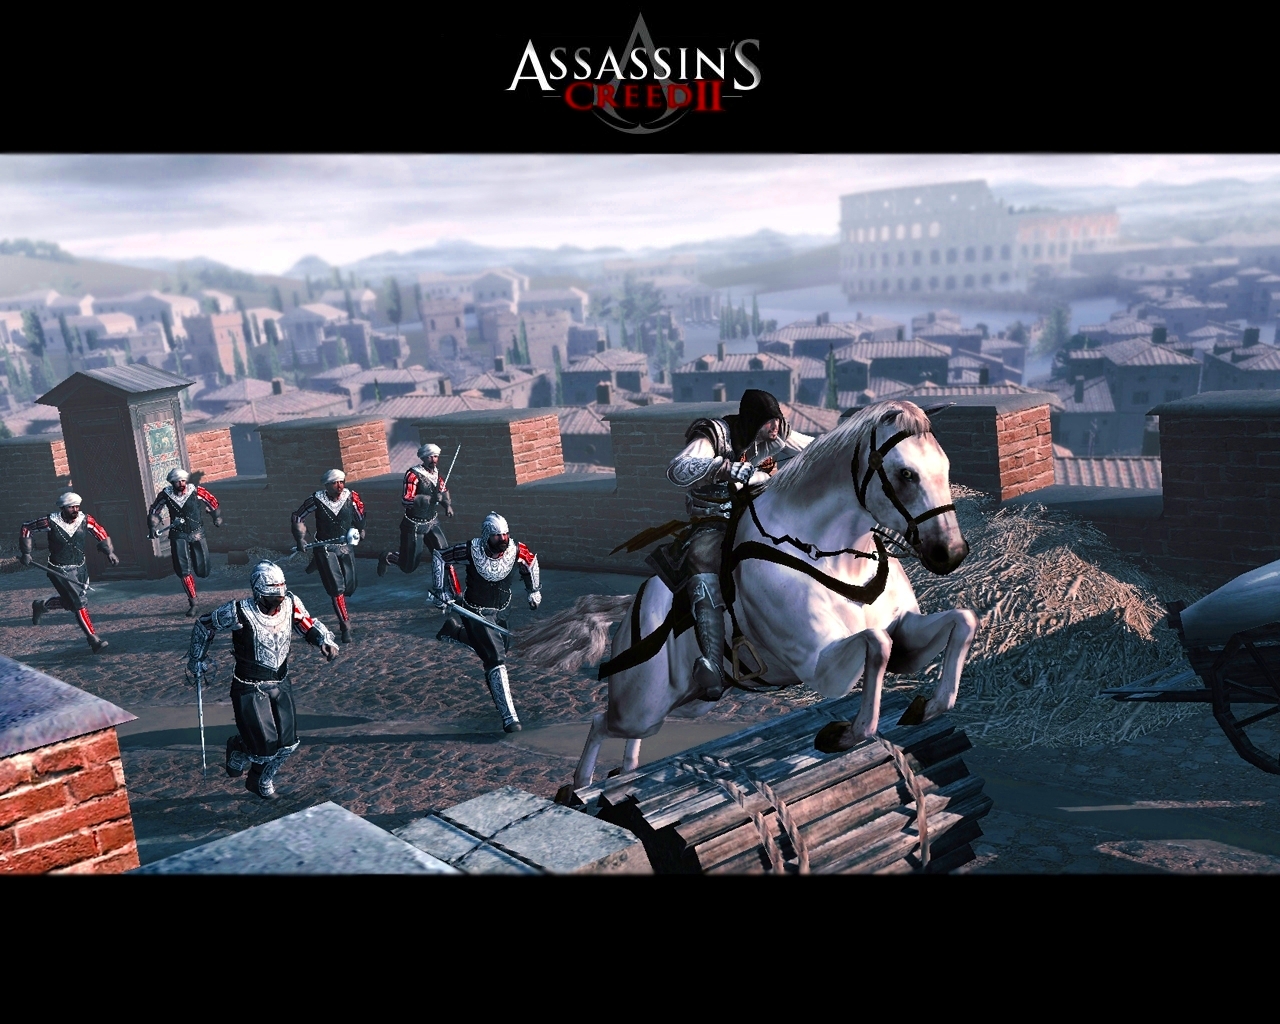 Games assassin creed 2. Ассасин Крид 2. Assassins Creed 2 ассасин. Ассасин Крид 2 2009. Ассасин Крид 2 Скриншоты.